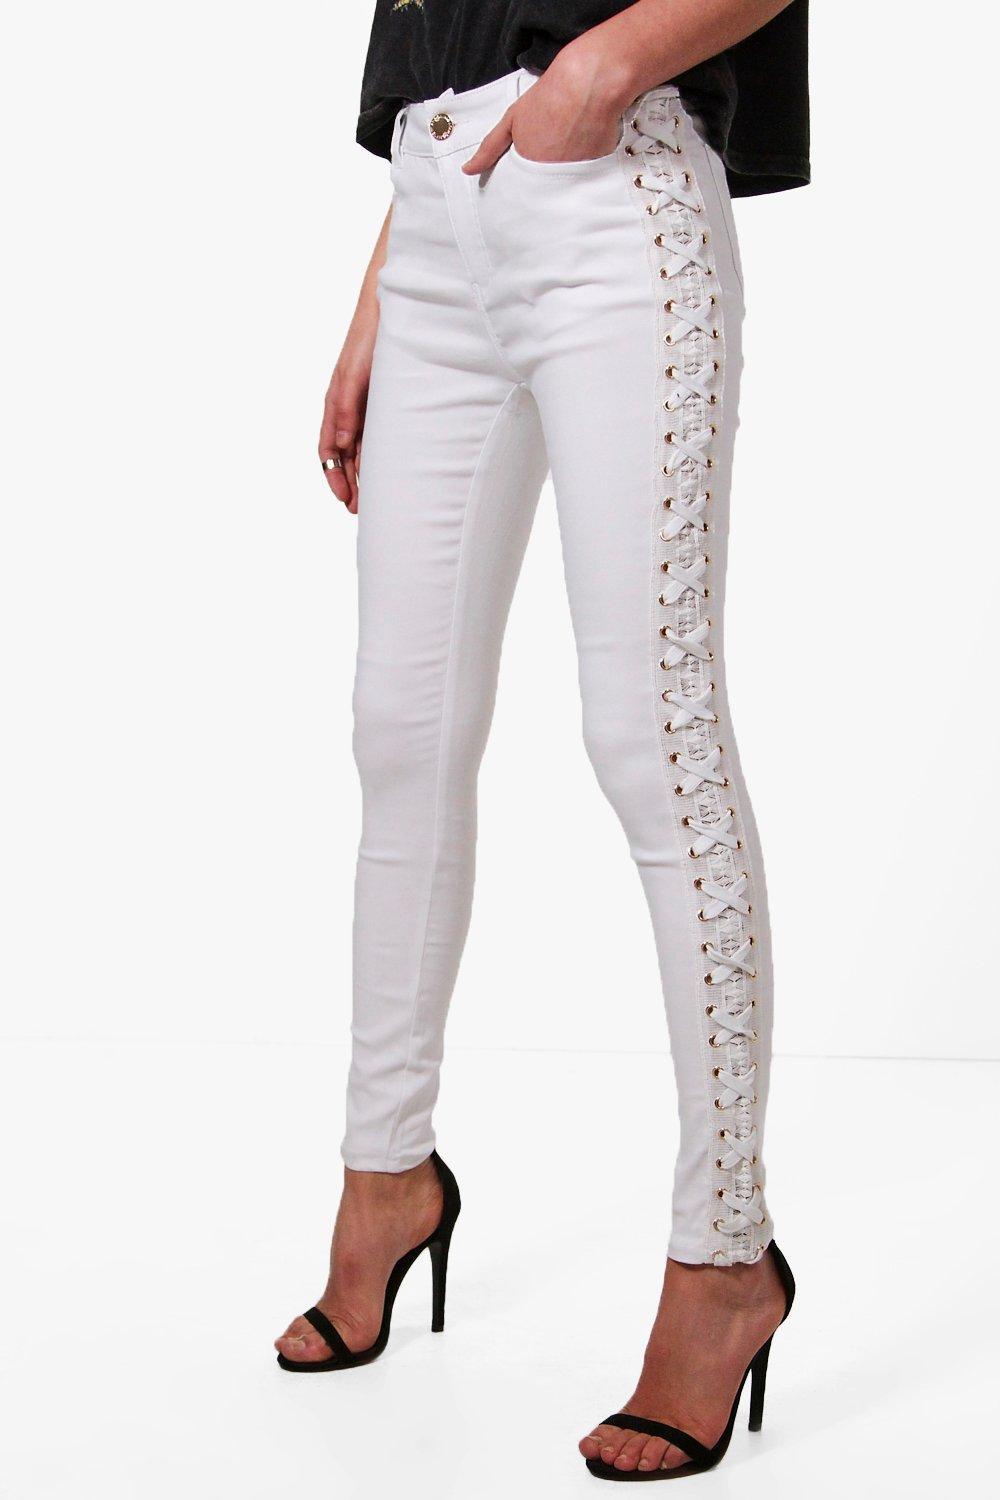 Boohoo Selma Side Lace Up Skinny Jeans in White | Lyst